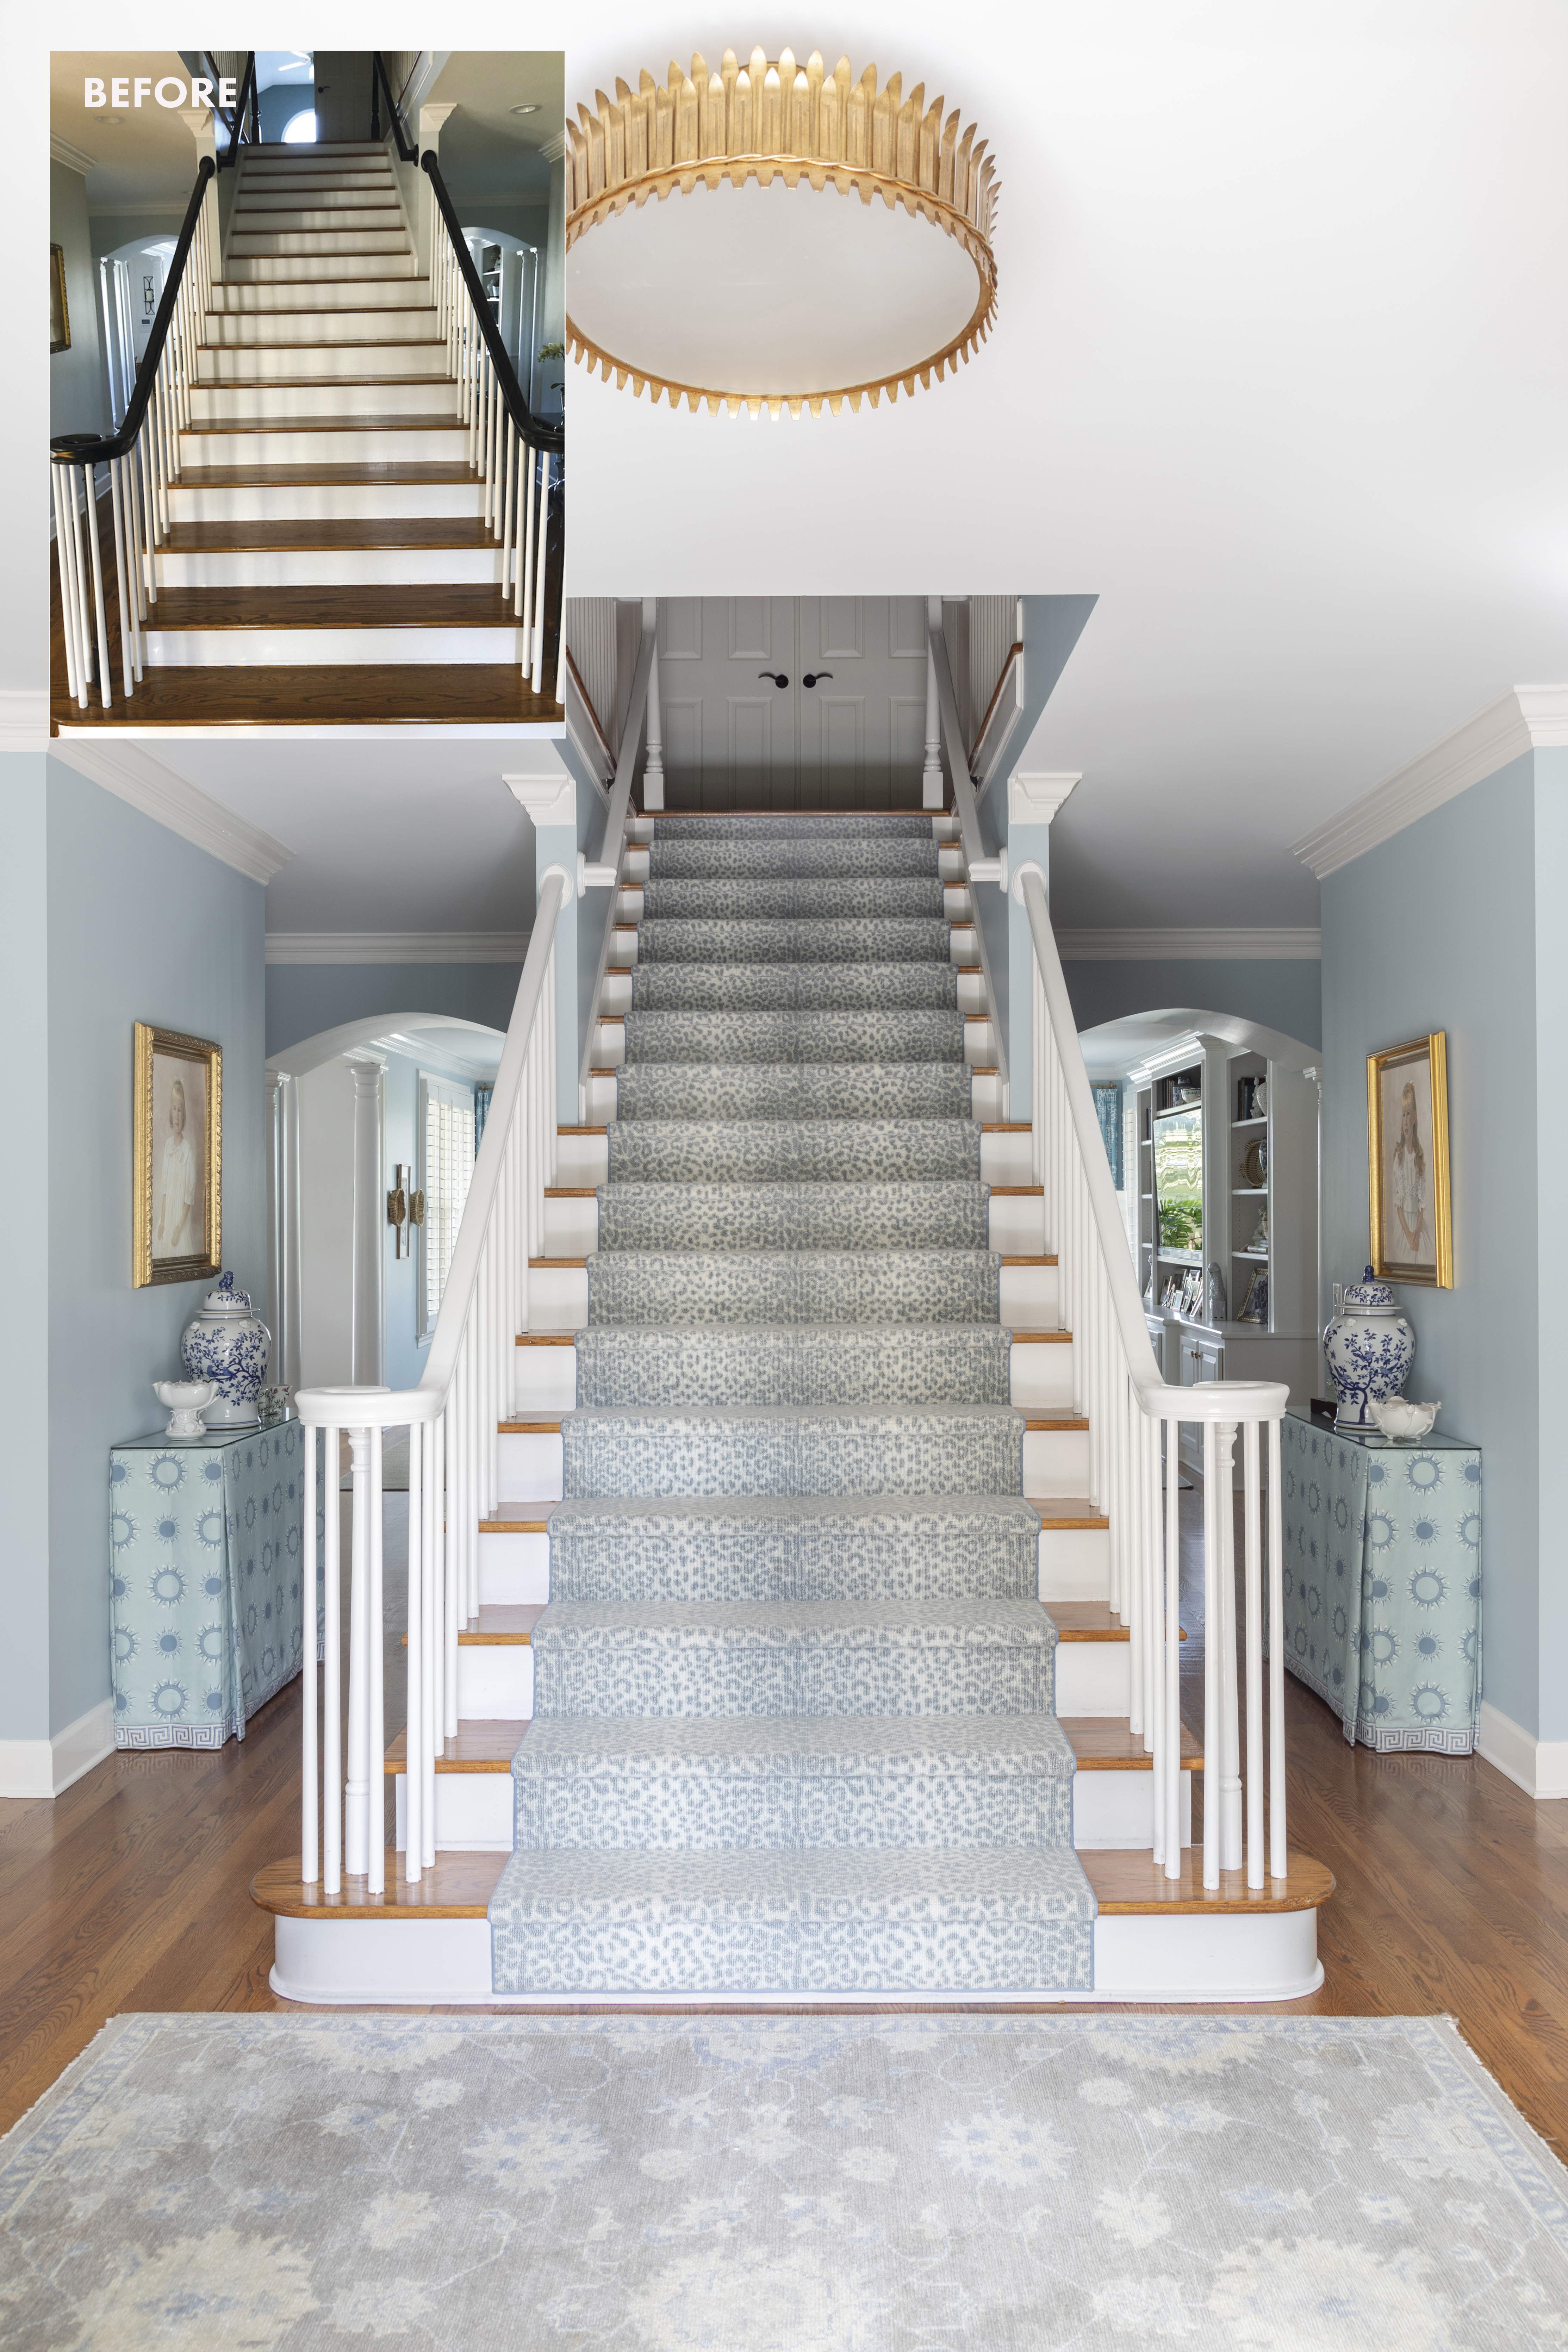 STEPPING IT UP: From traditional to terrific, the entryway and staircase is enlivened by a bold blue leopard-print stair runner by Nourison, installed for design but also to help the Ramas’ elderly Labrador, Grady, and two rambunctious grandchildren navigate the steps safely. A gilded semi-flush light fixture from Visual Comfort, sheds light on the scene.